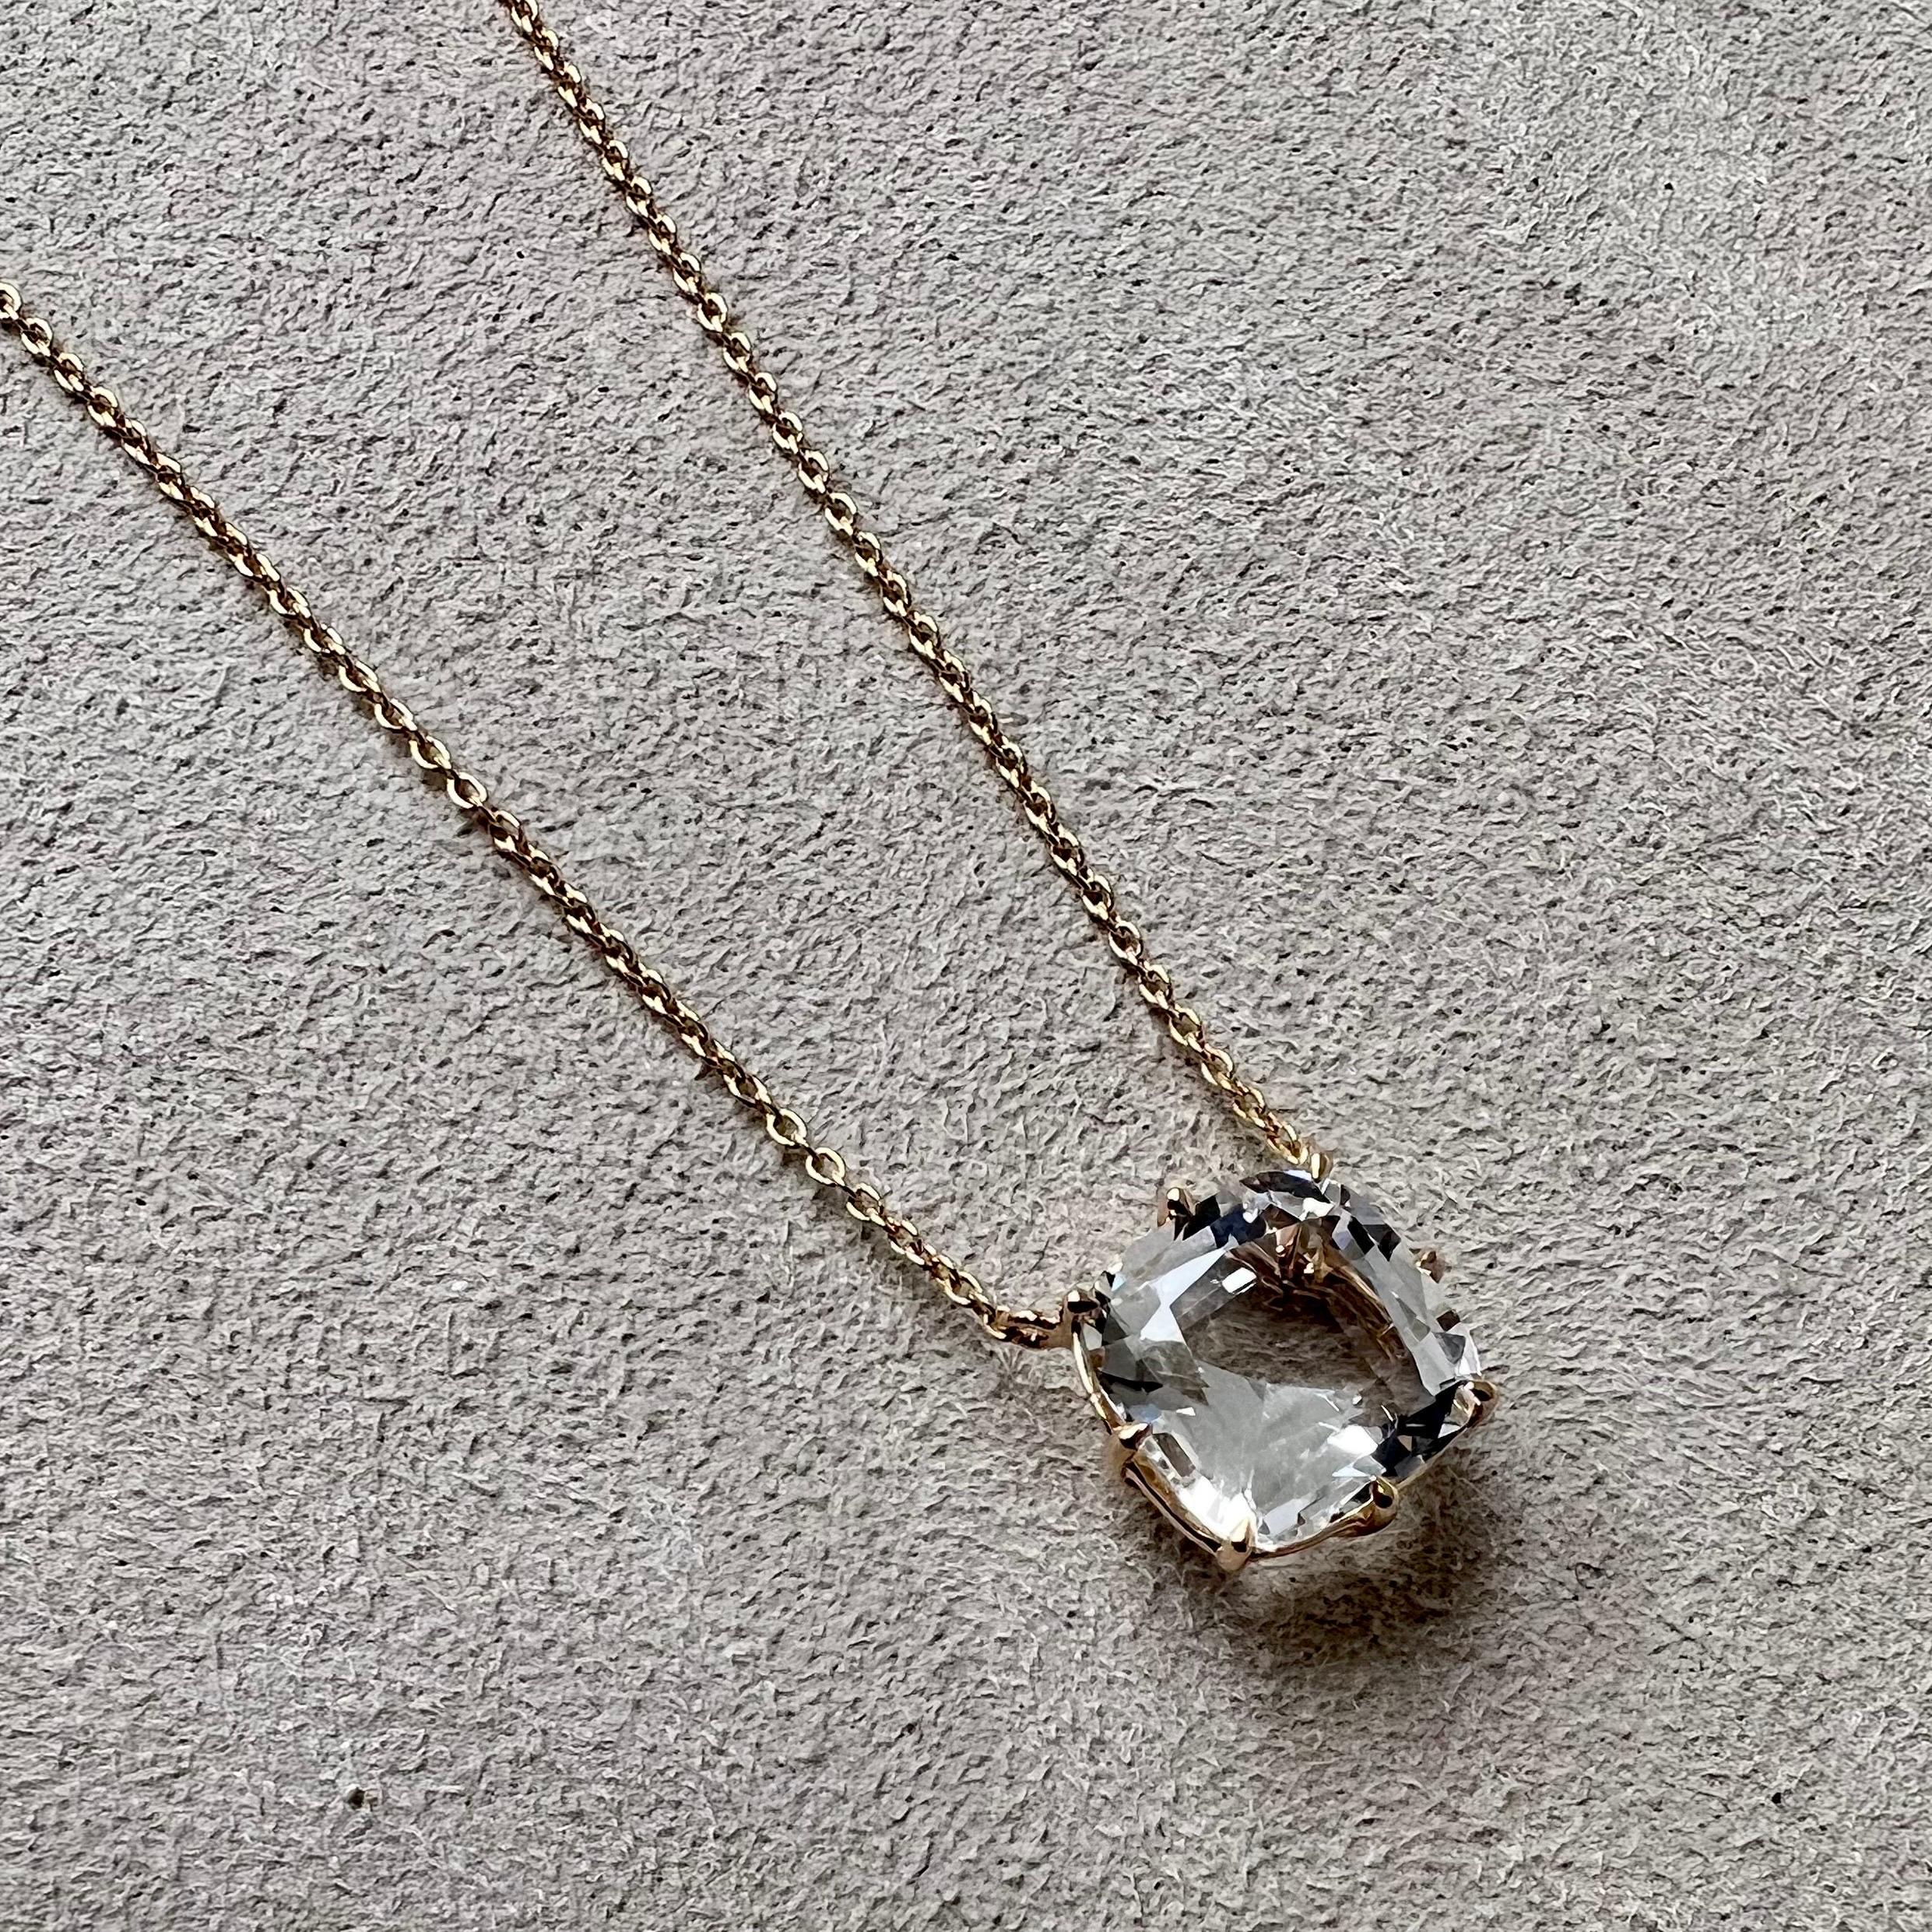 Created in 18 karat rose gold
Rock Crystal 4 carats approx.
18 inch chain with loops at 16th and 17th inch

Crafted from 18k rose gold and including a magnificent Rock Crystal of approximately 4 carats, this necklace is complete with a complimentary